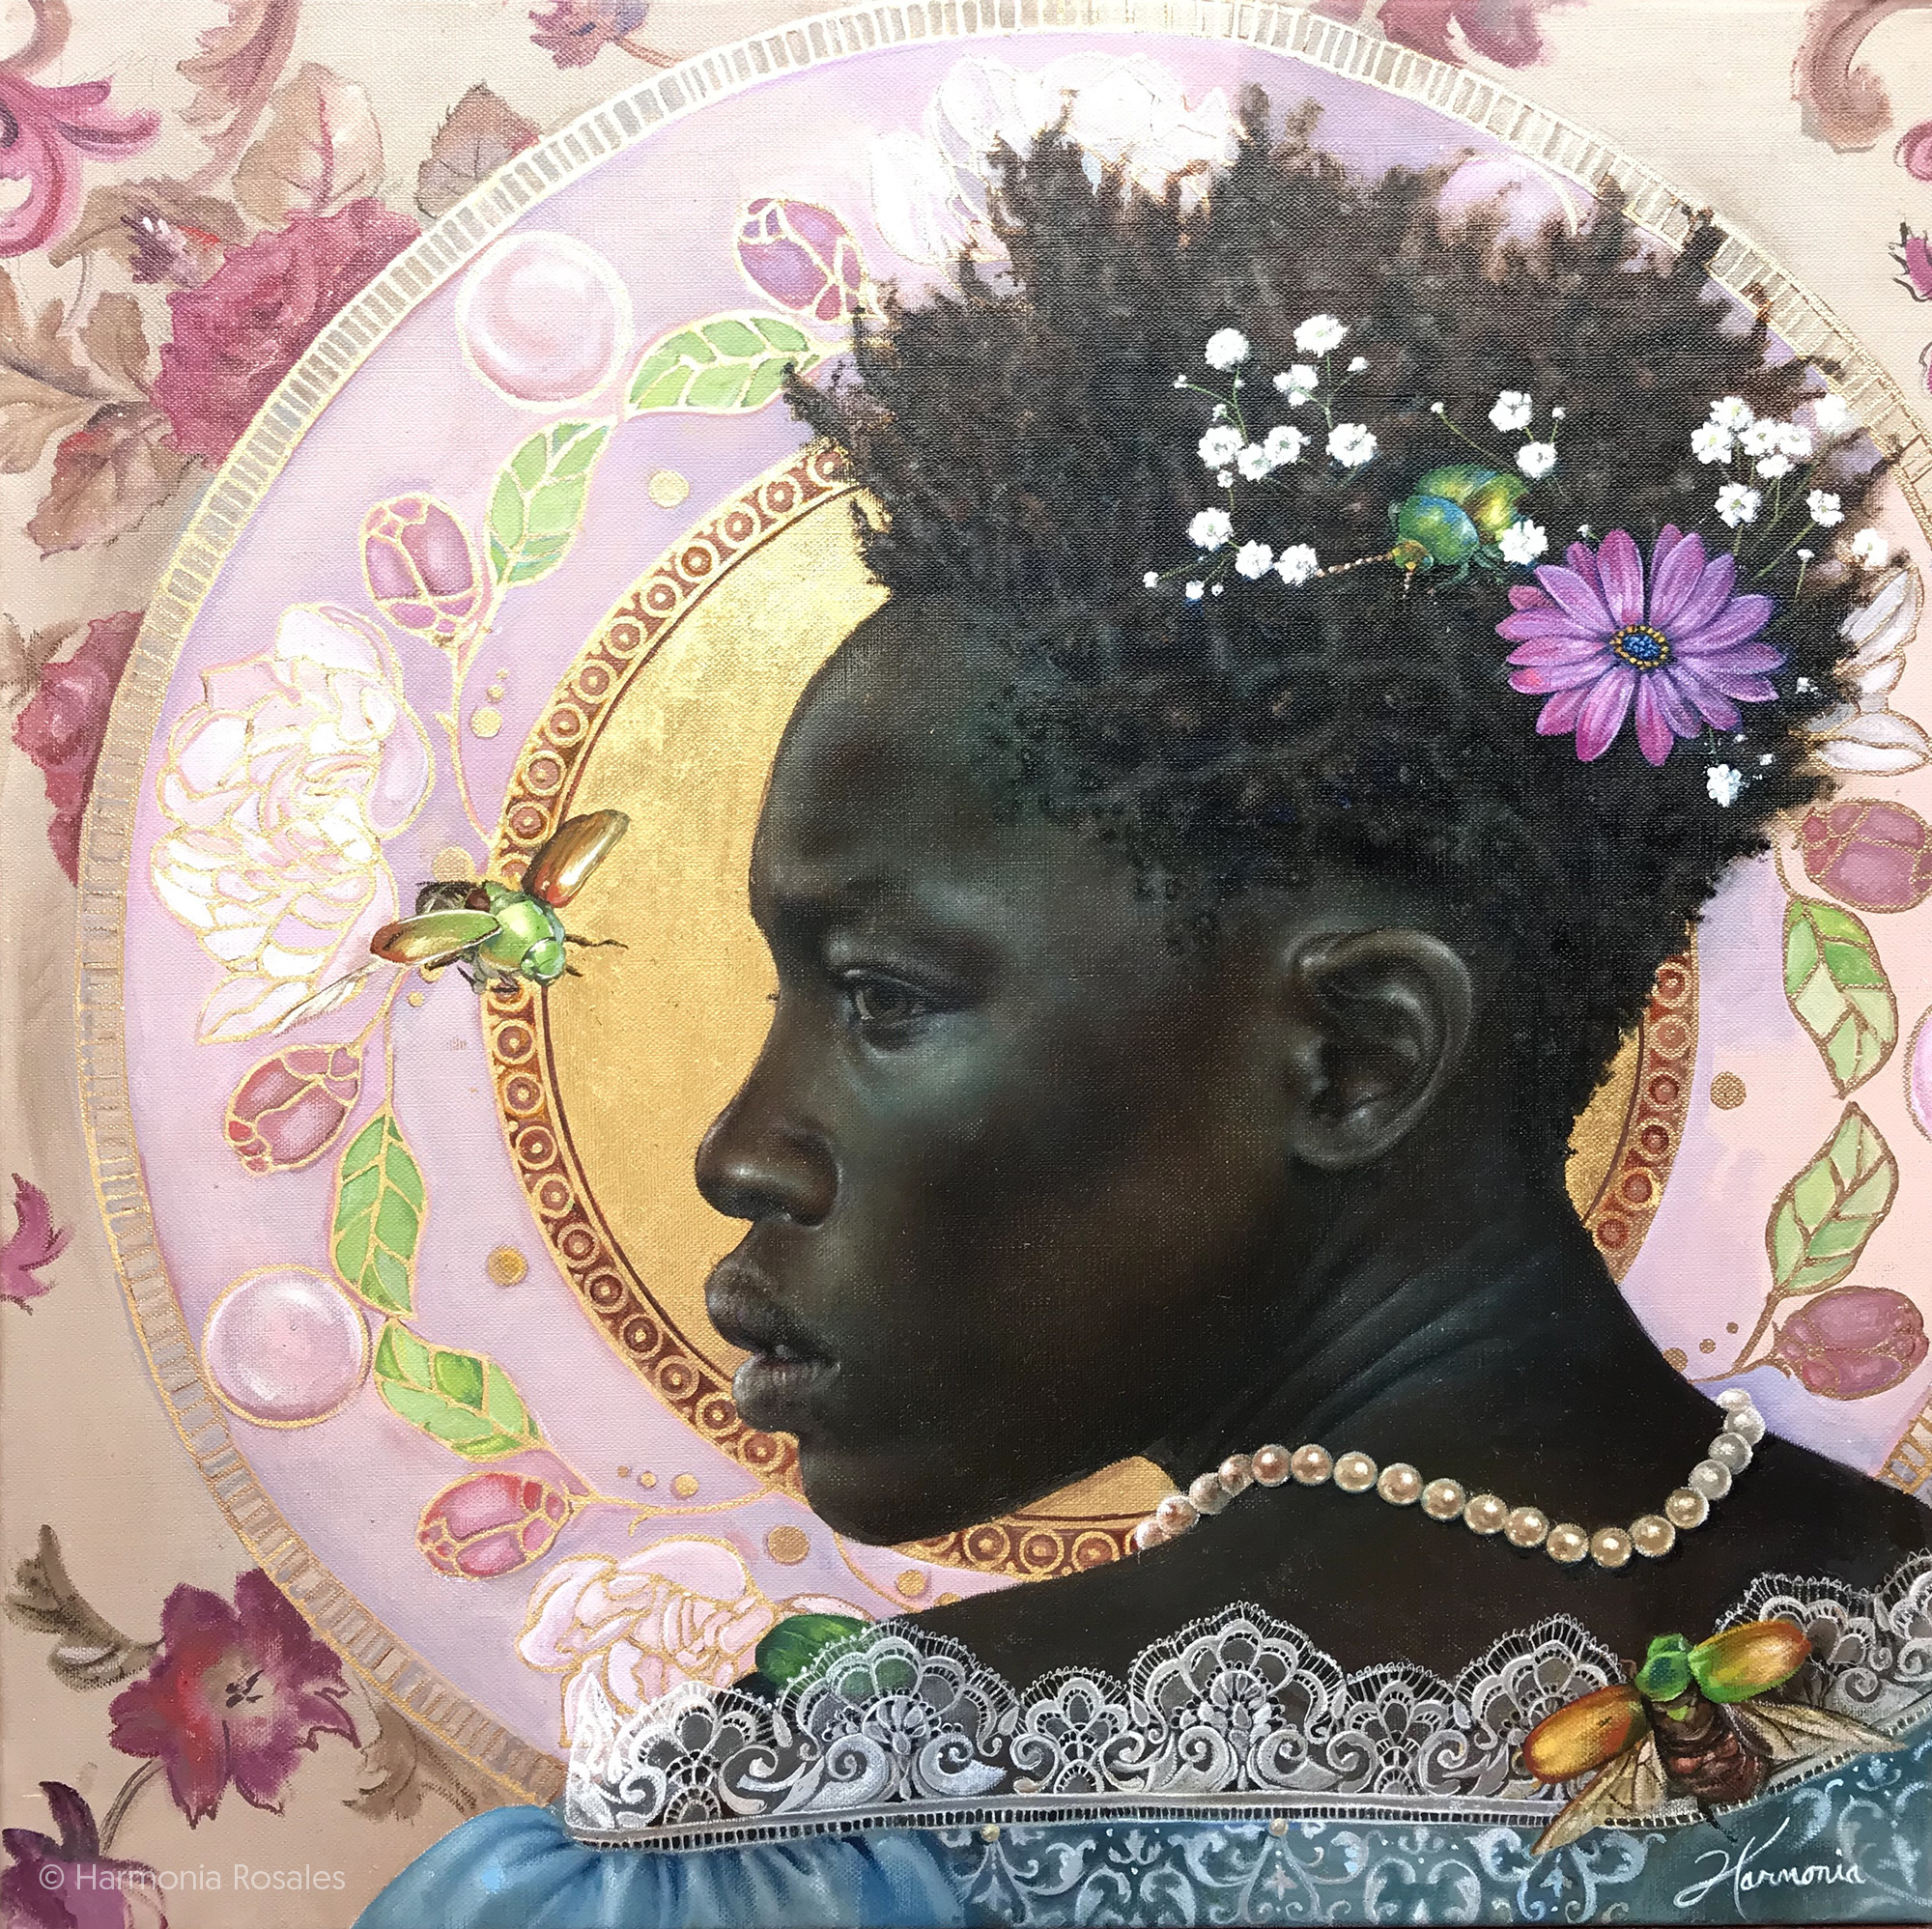 Memory and Self-Love Highlight Profound Portraits of Black Figures by Harmonia Rosales